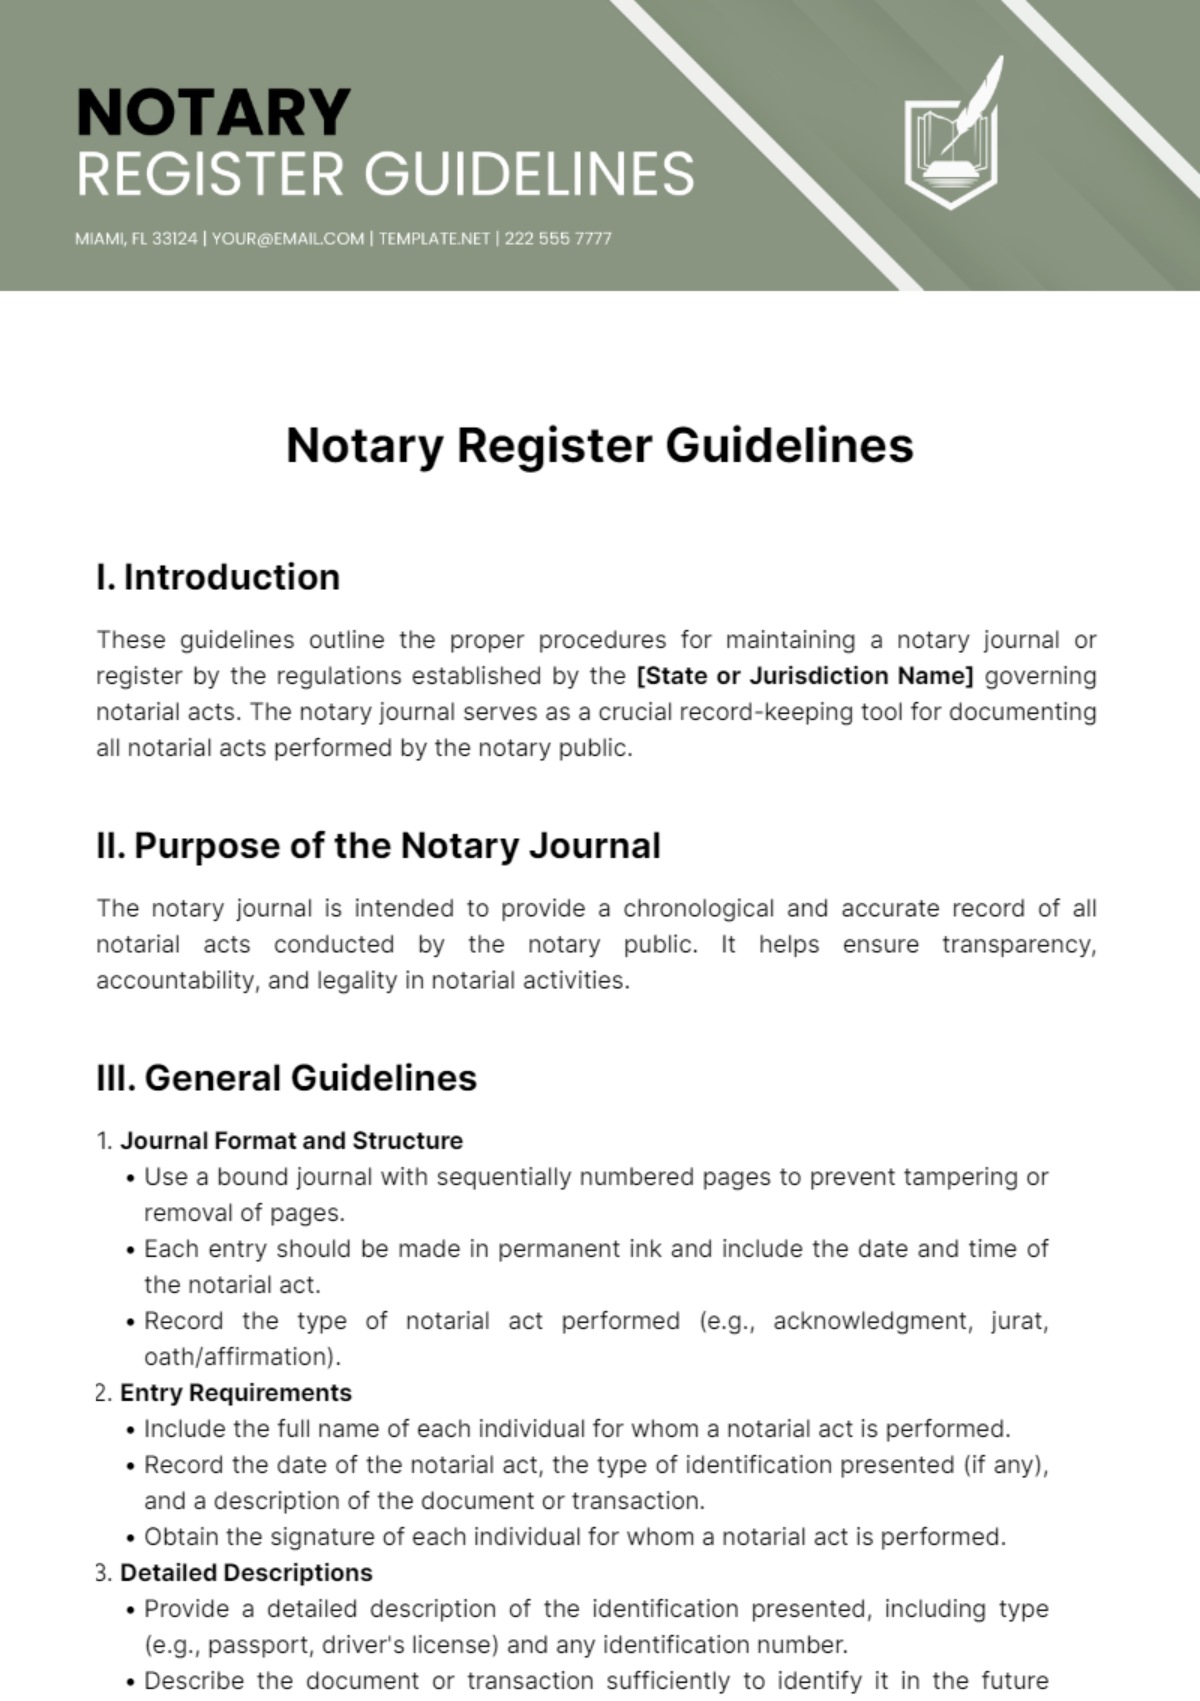 Free Notary Register Guidelines Template